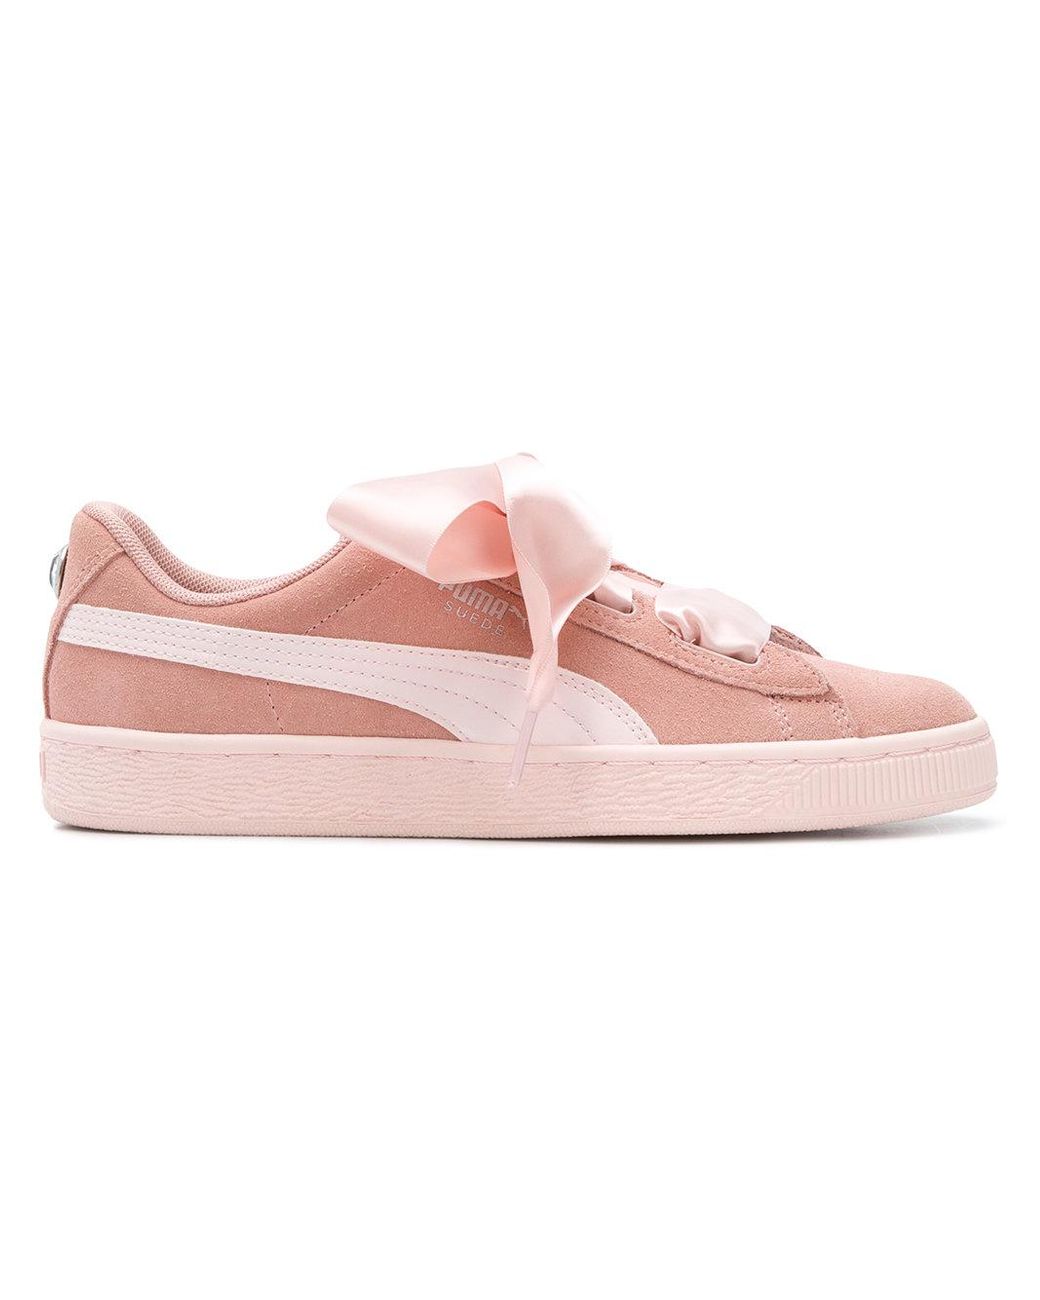 PUMA Ribbon Lace-up Sneakers in Pink | Lyst